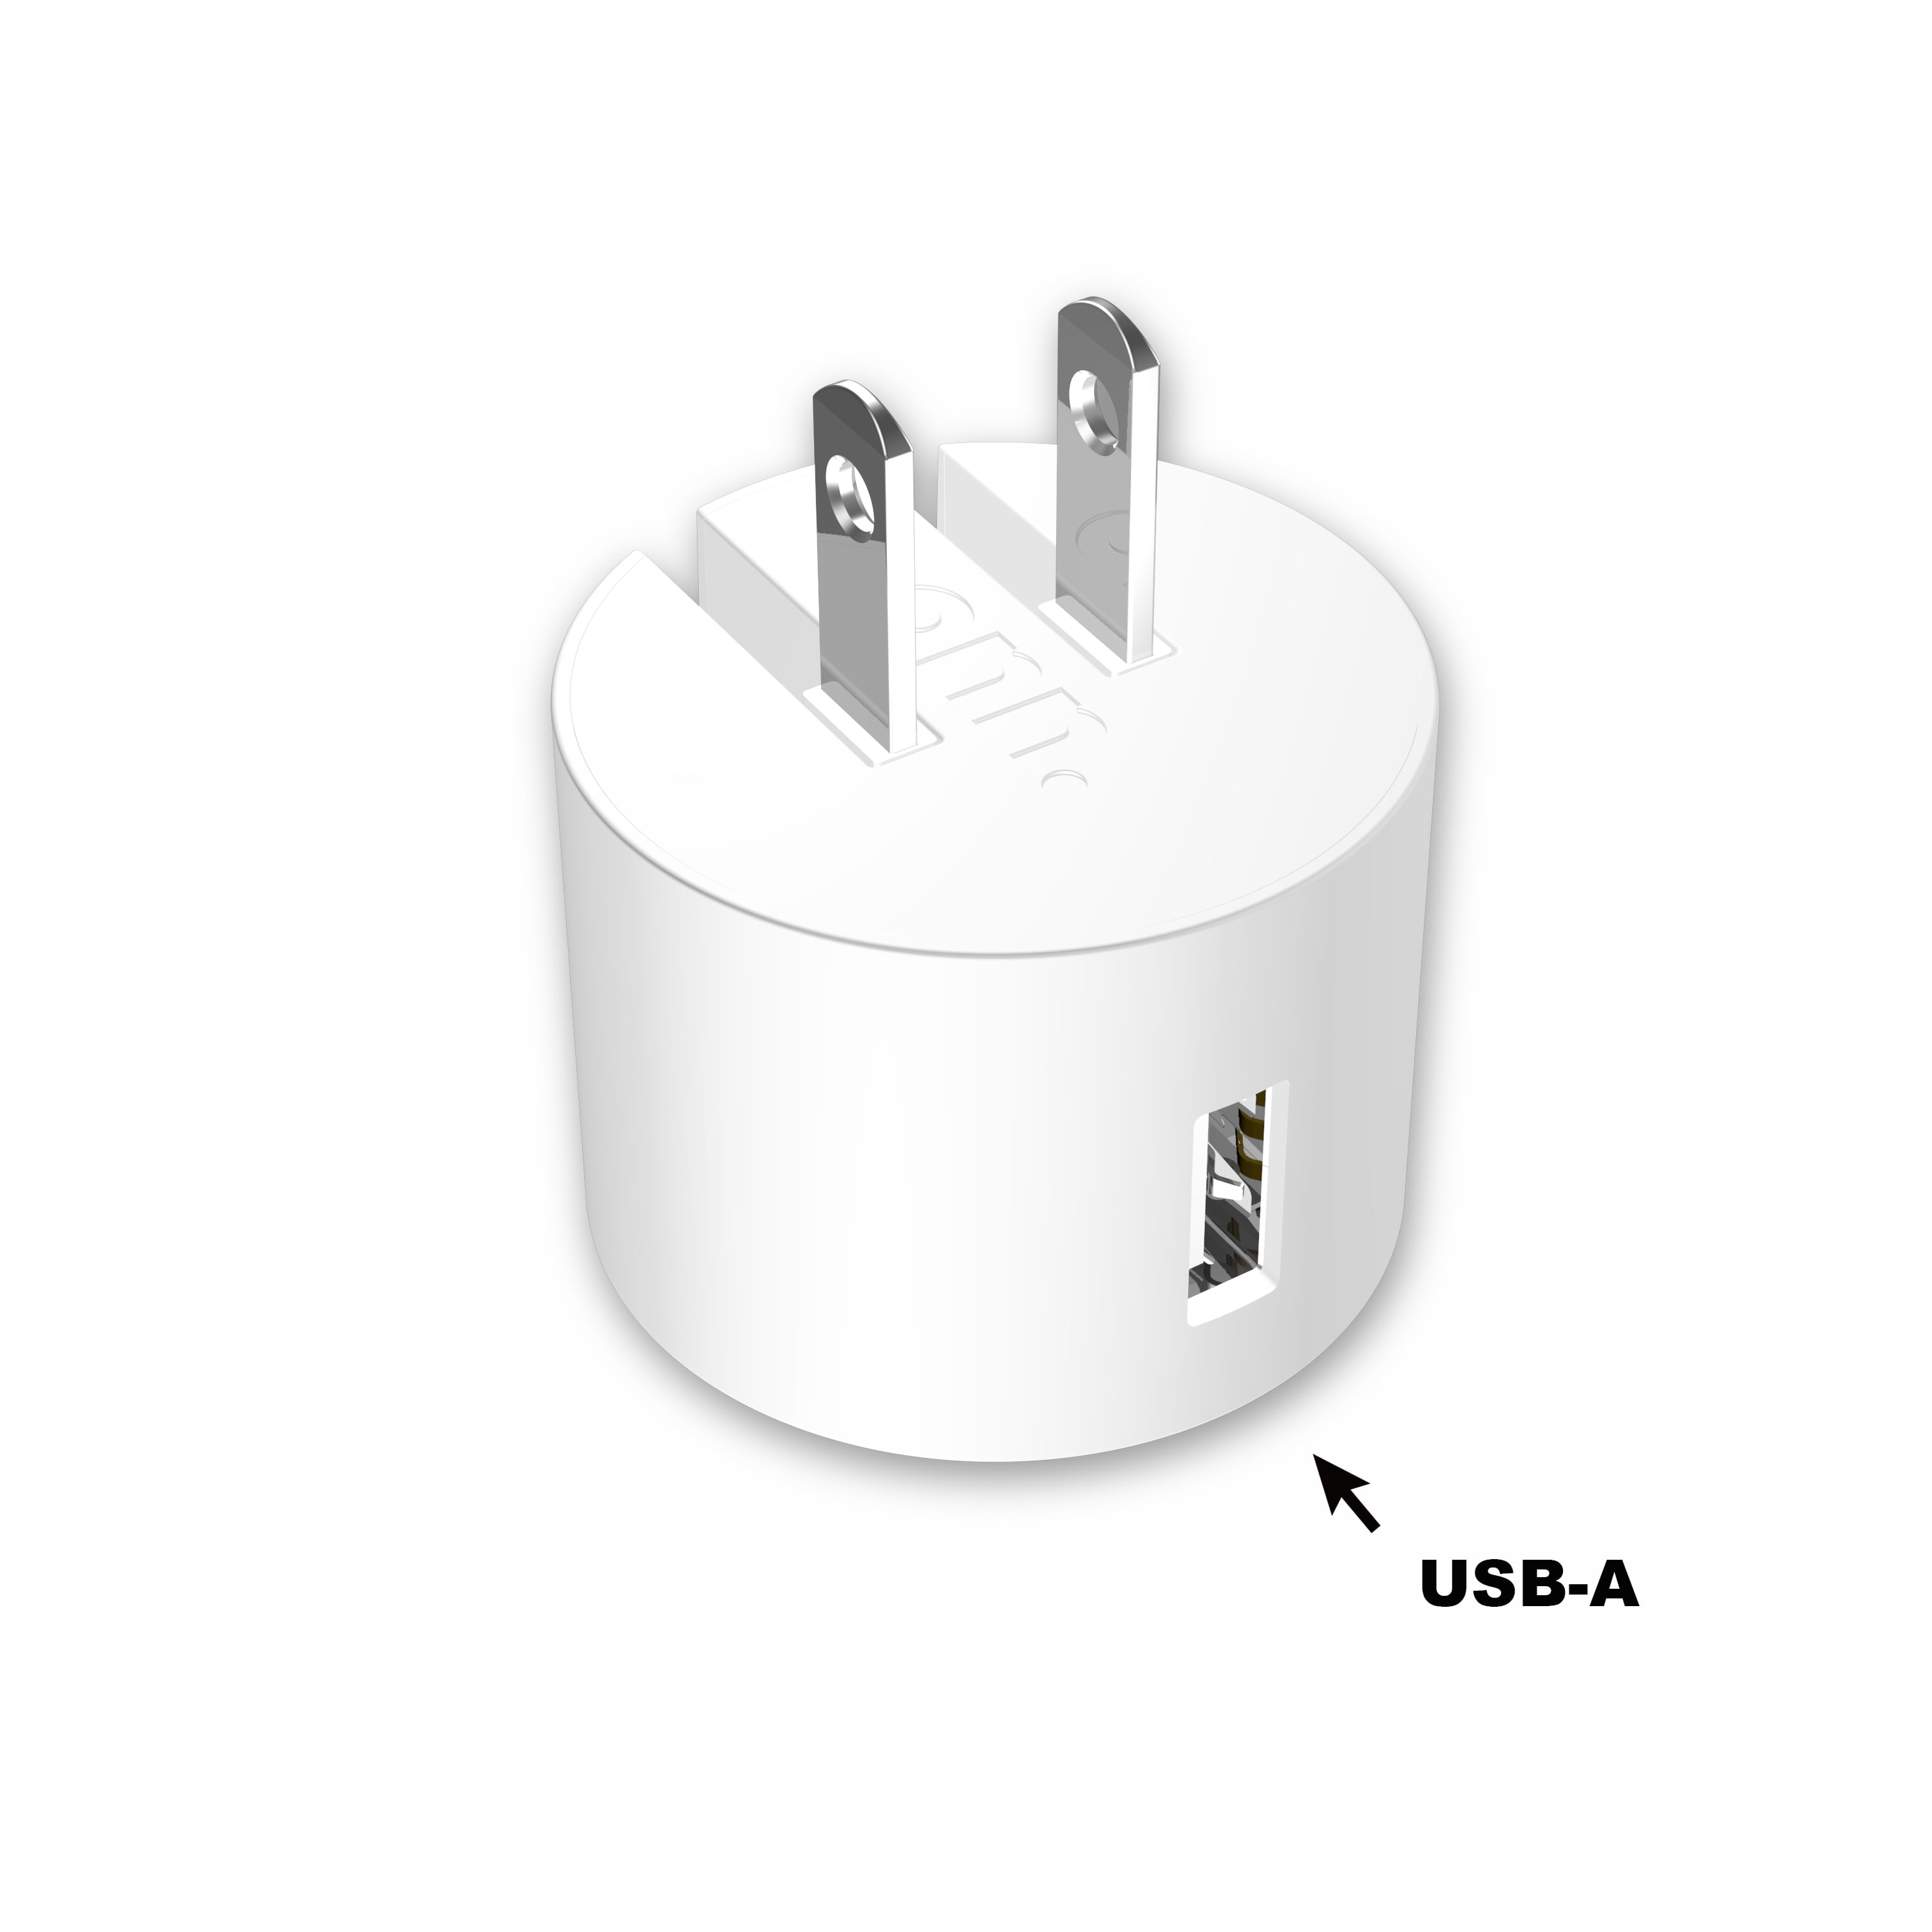 onn. 2.4A USB Wall Charger with Foldable Plug-White, for iPhone, iPad and Android Smartphones